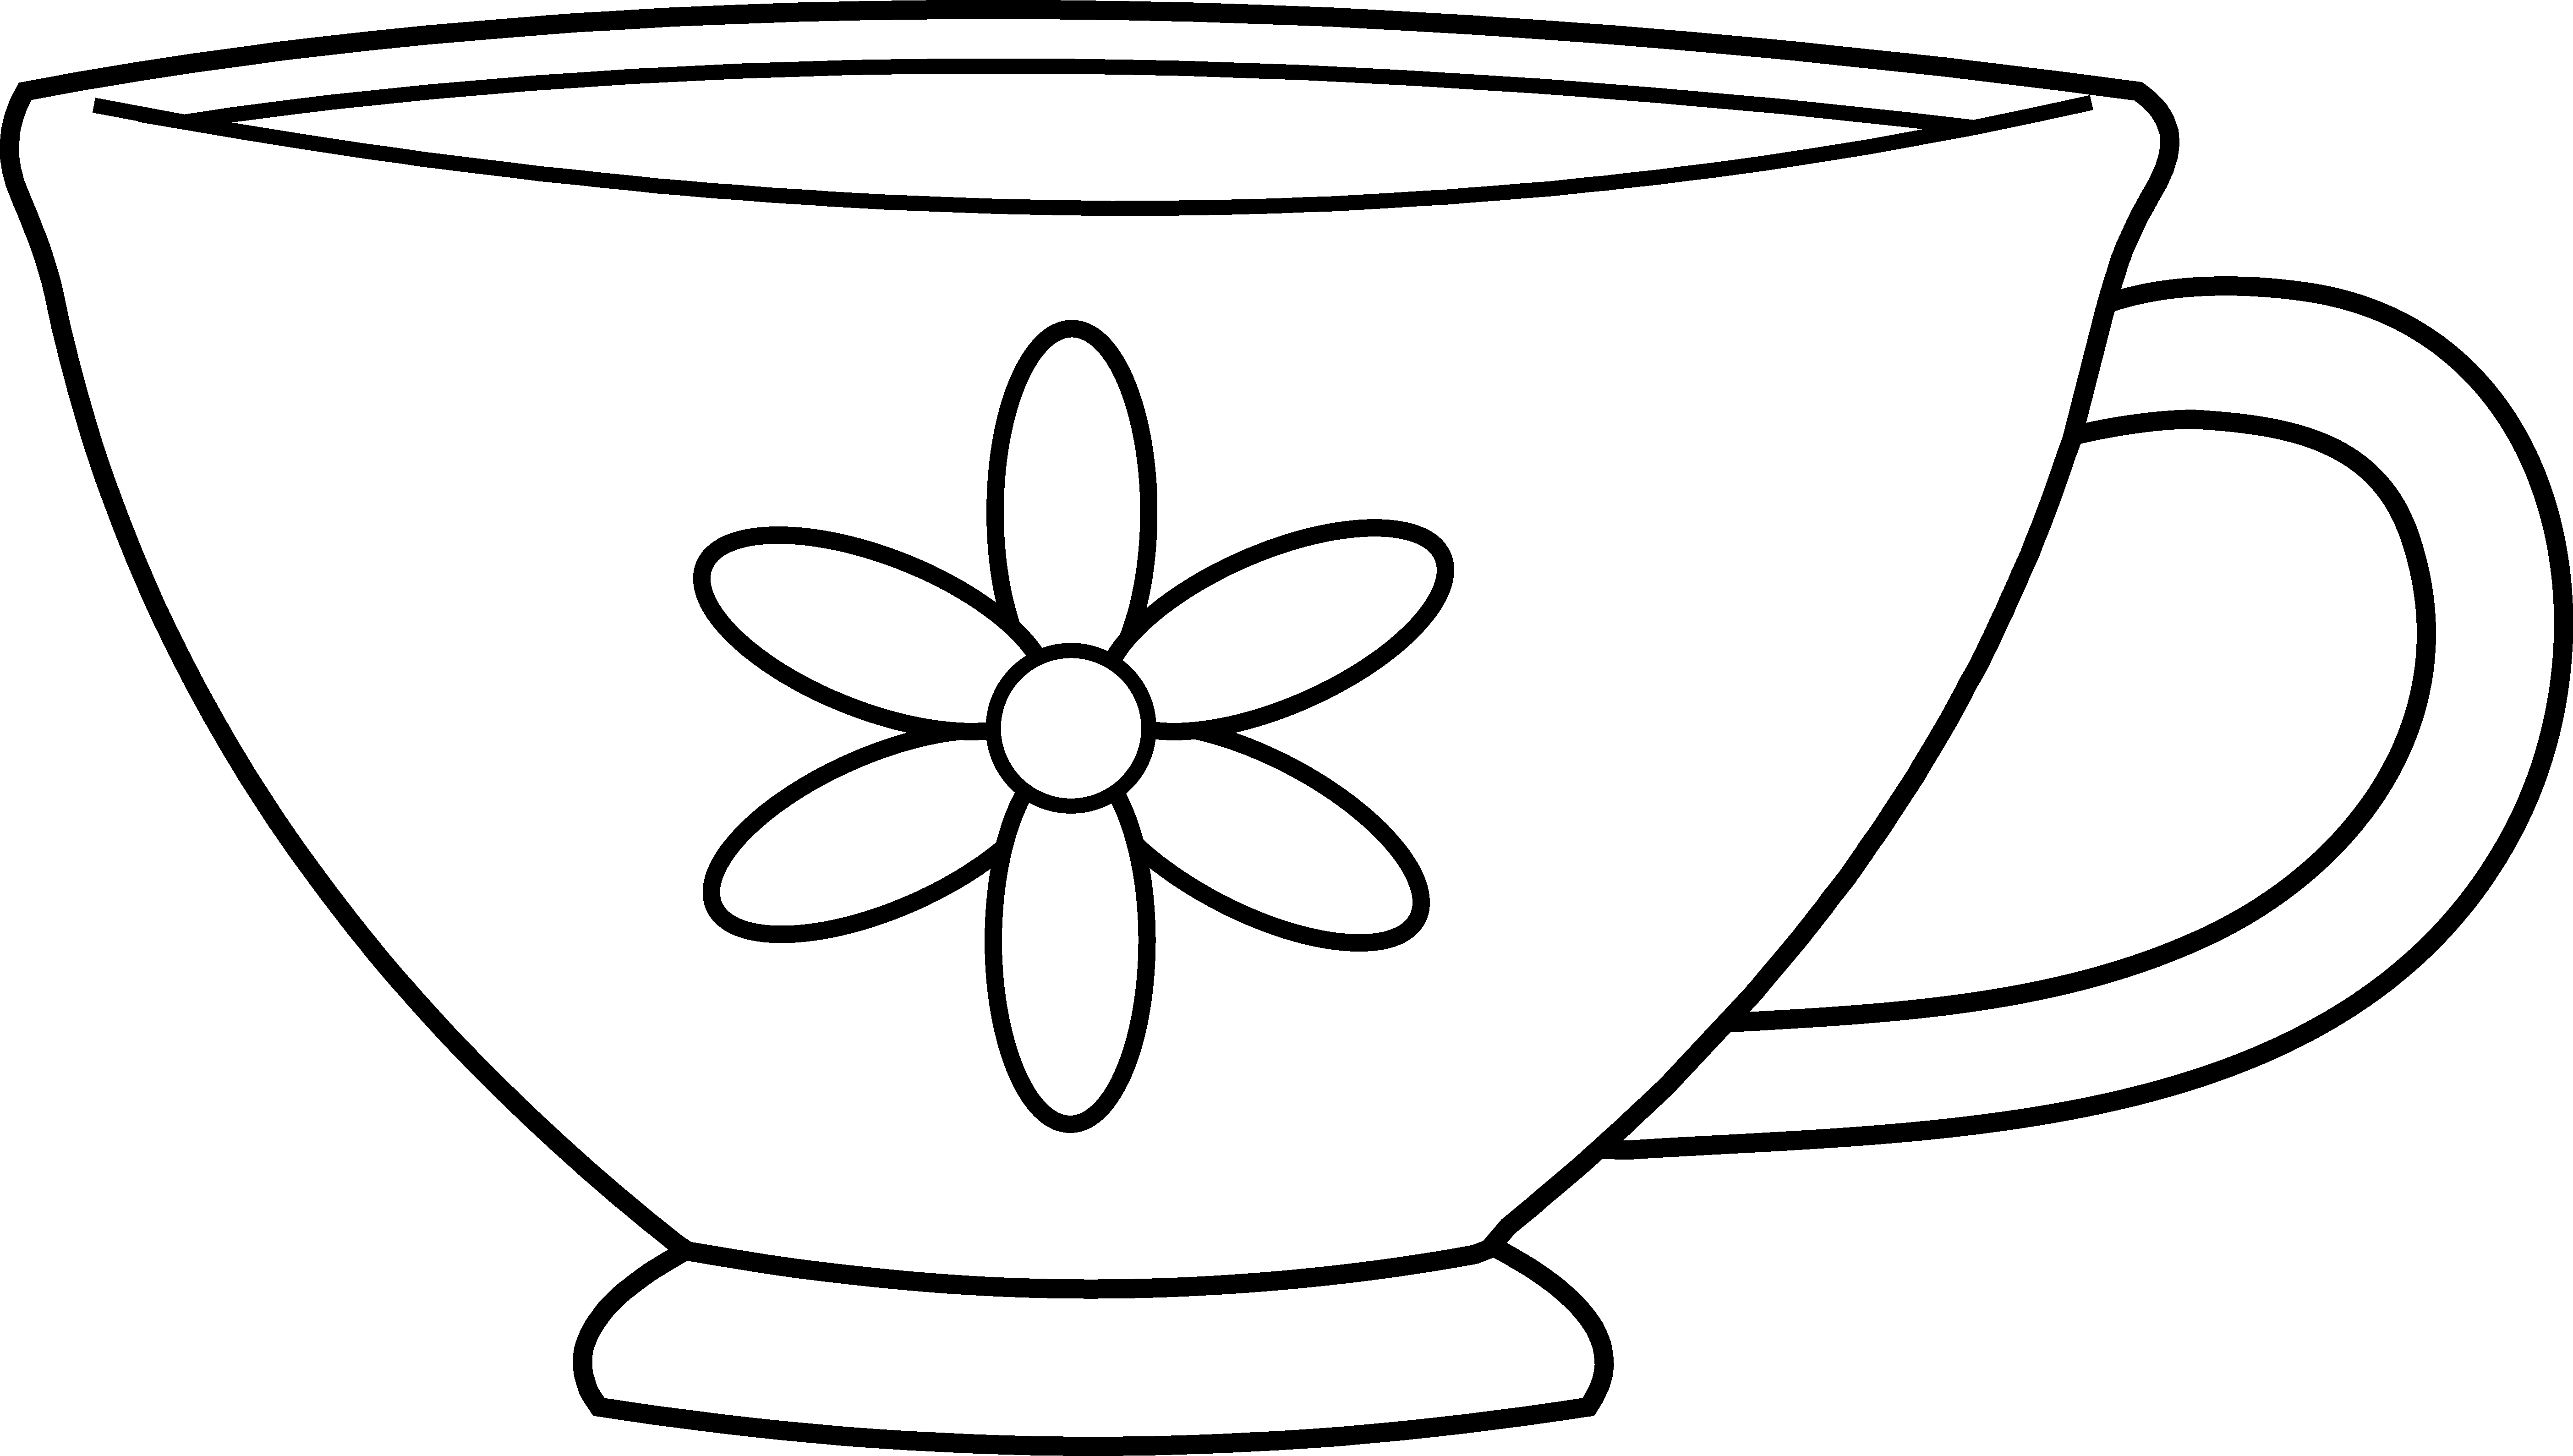 Teacup Coloring Pages To Print Cute Teacup Coloring Page Free Clip Art